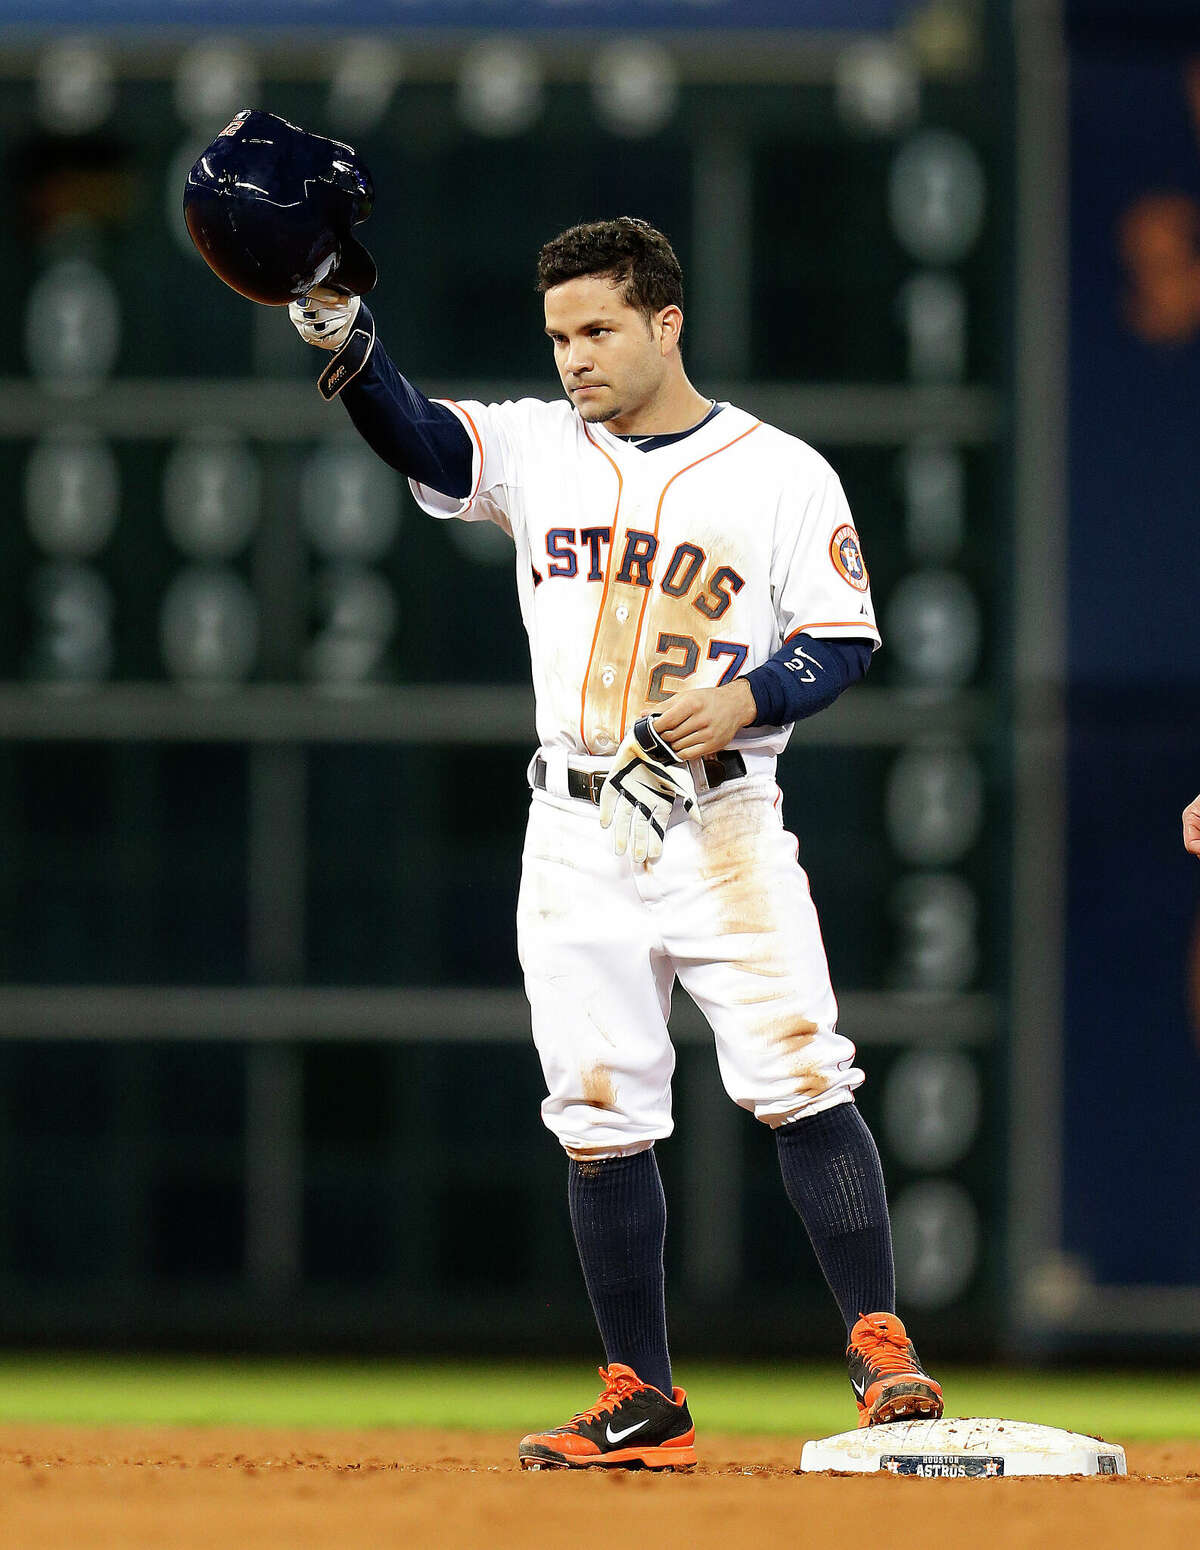 FOX Sports: MLB on X: 2,000 hits for Jose Altuve! Altuve becomes the 3rd  player in Astros history to reach 2,000 career hits, joining Hall of Famers  Craig Biggio and Jeff Bagwell